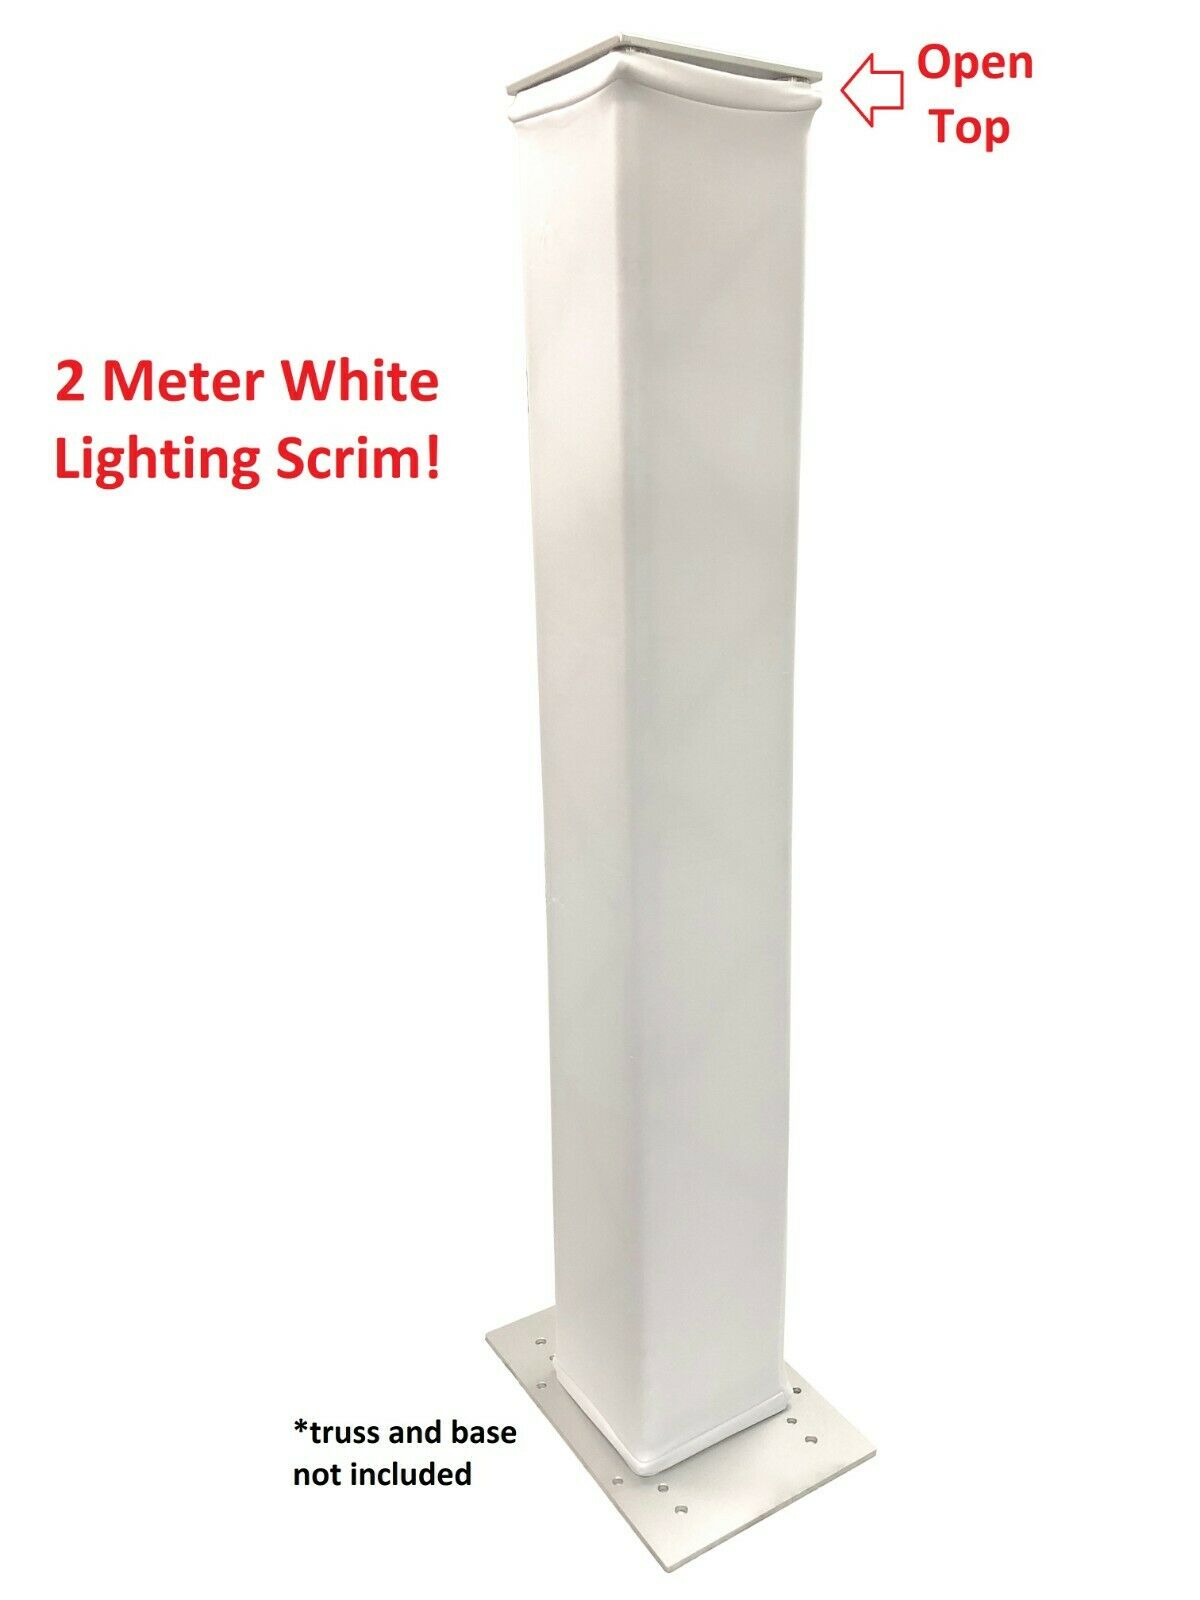 6 Foot White Totem/lighting Truss Stand Scrim Cover Sleeve Sock (6ft) Open Top